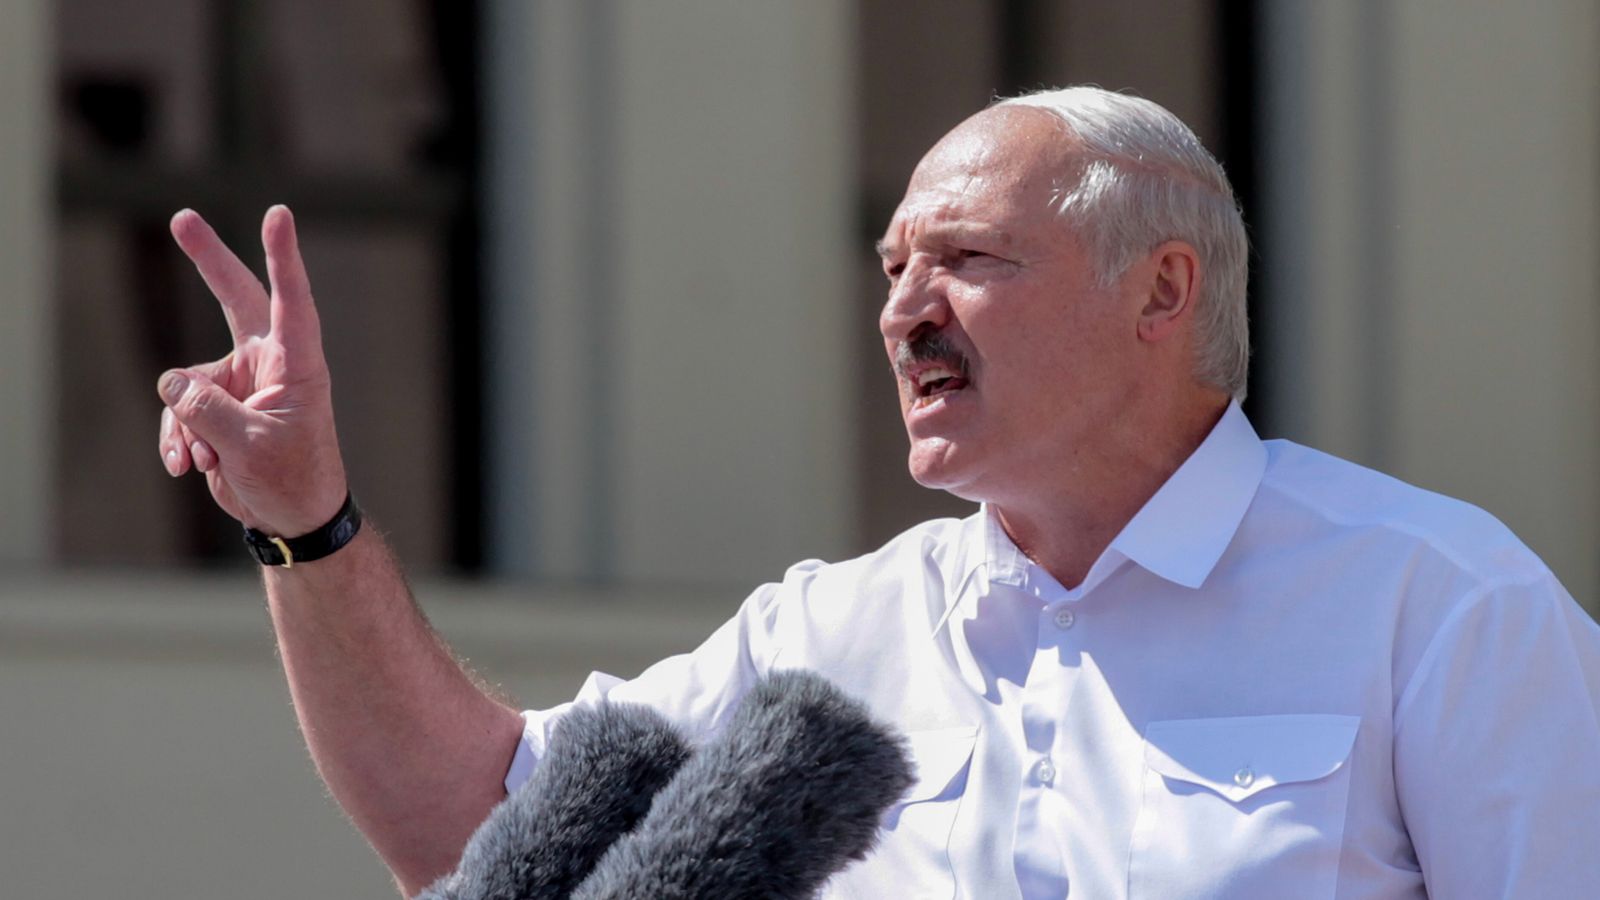 Belarus: President Lukashenko claims NATO massing on border and denies election was rigged